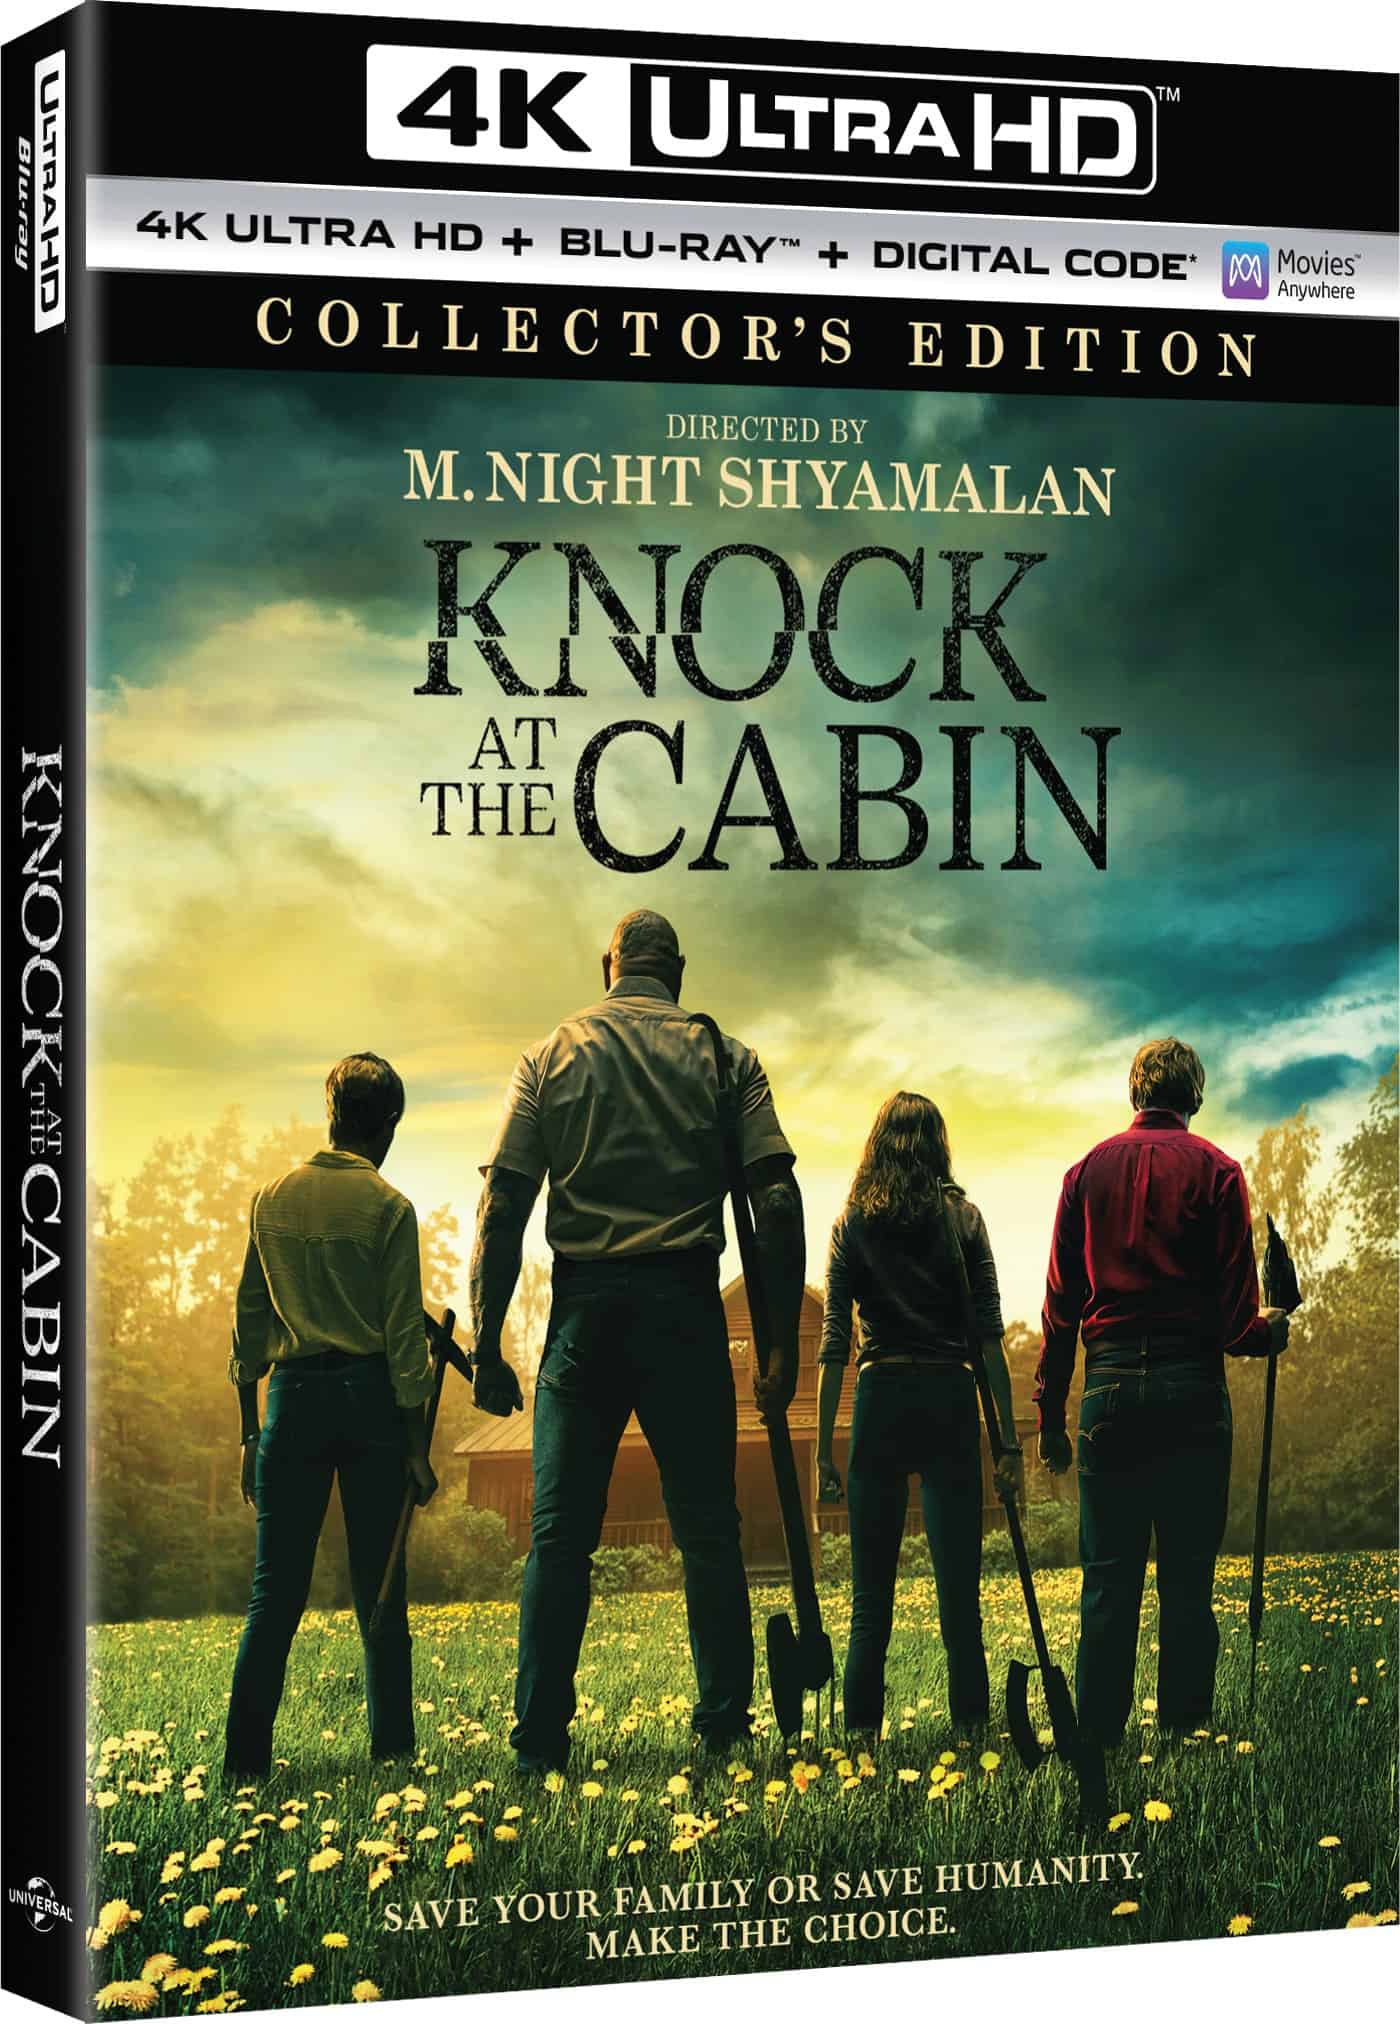 M. Night Shyamalan's Latest Film "KNOCK AT THE CABIN" offers clips! 22